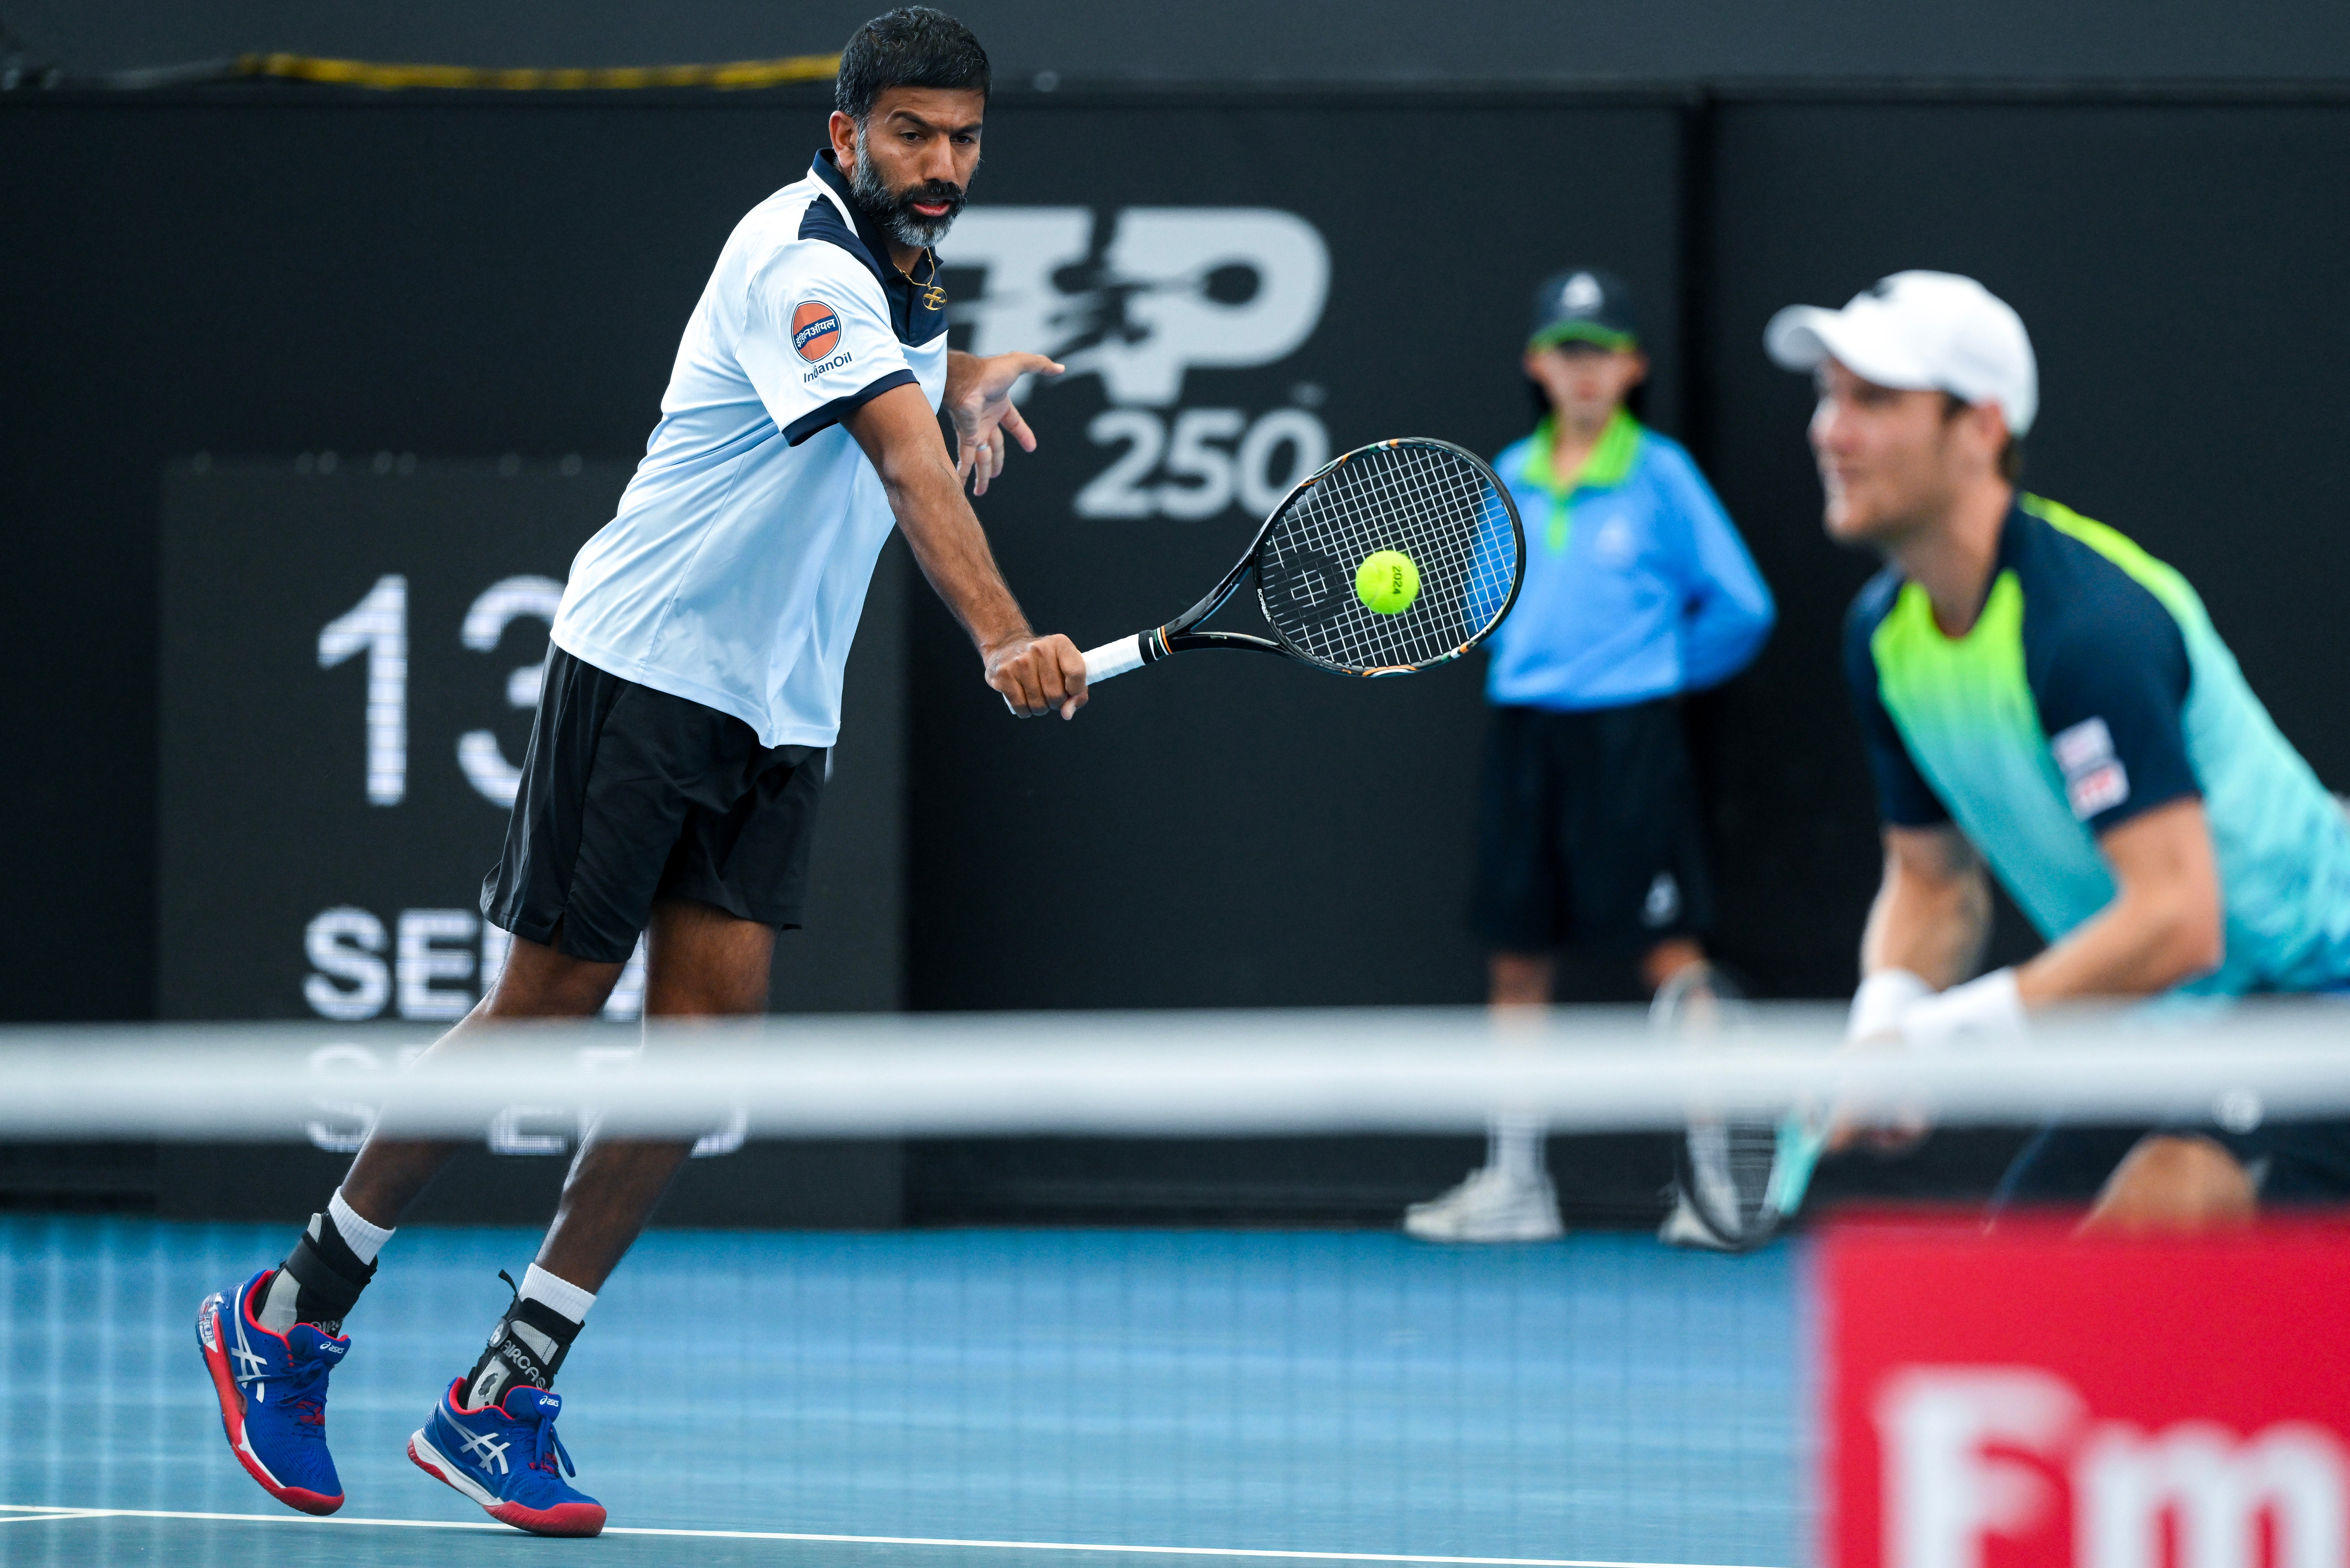 Rohan Bopanna has risen to the top of the men’s doubles rankings